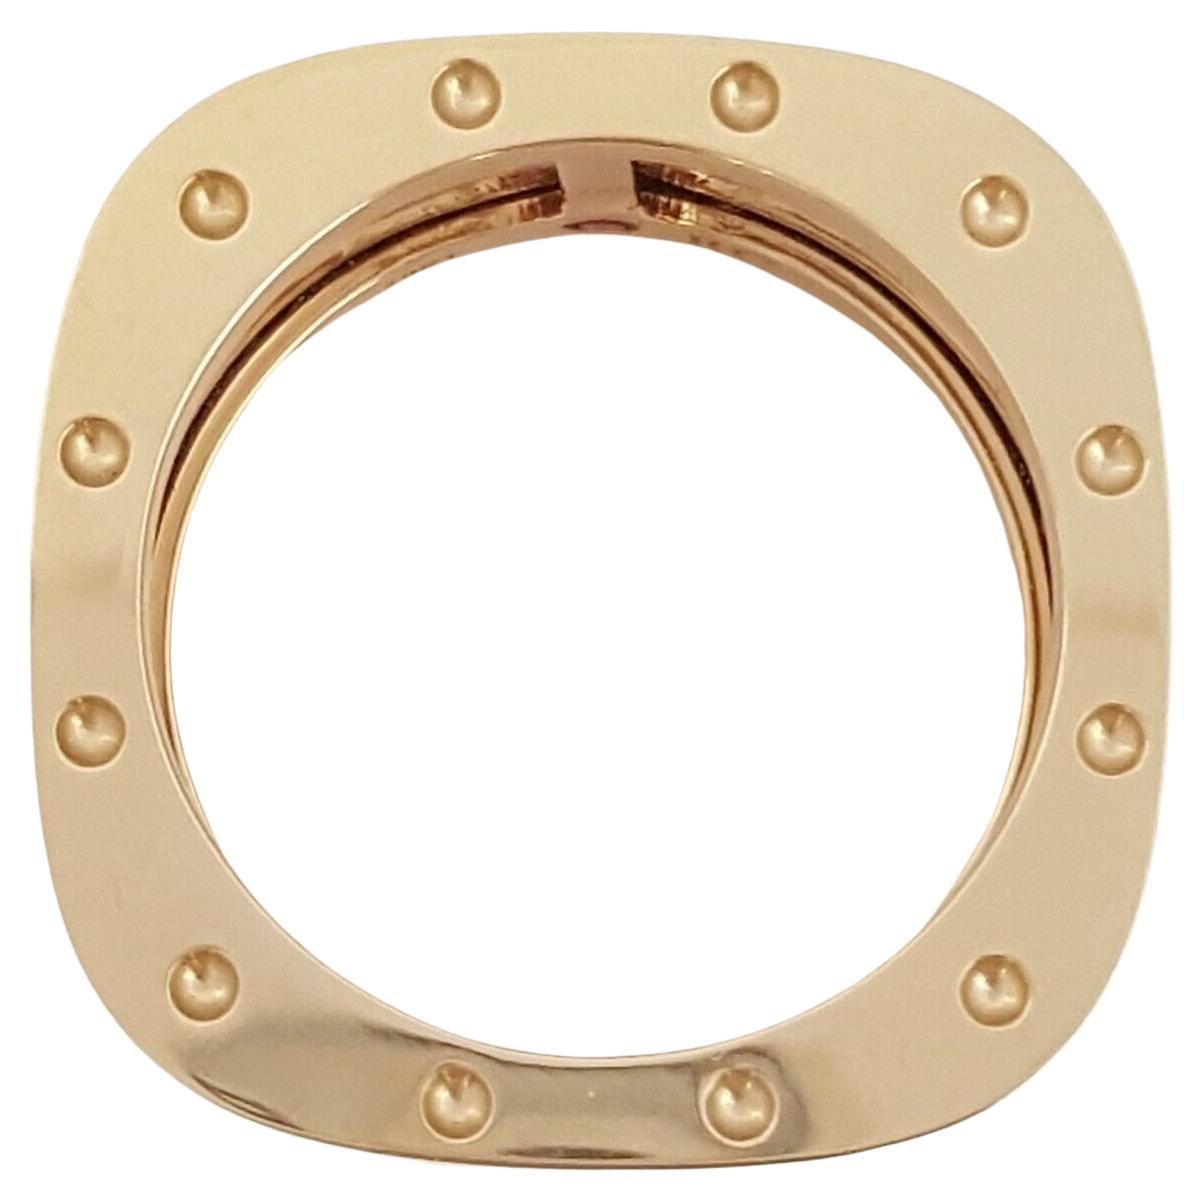 Roberto Coin 18K Yellow Gold Pois Moi Double Row Statement Ring / Band.



The ring weighs 11.4 grams, with measurement of 10.8mm Wide and 2.5mm thick.